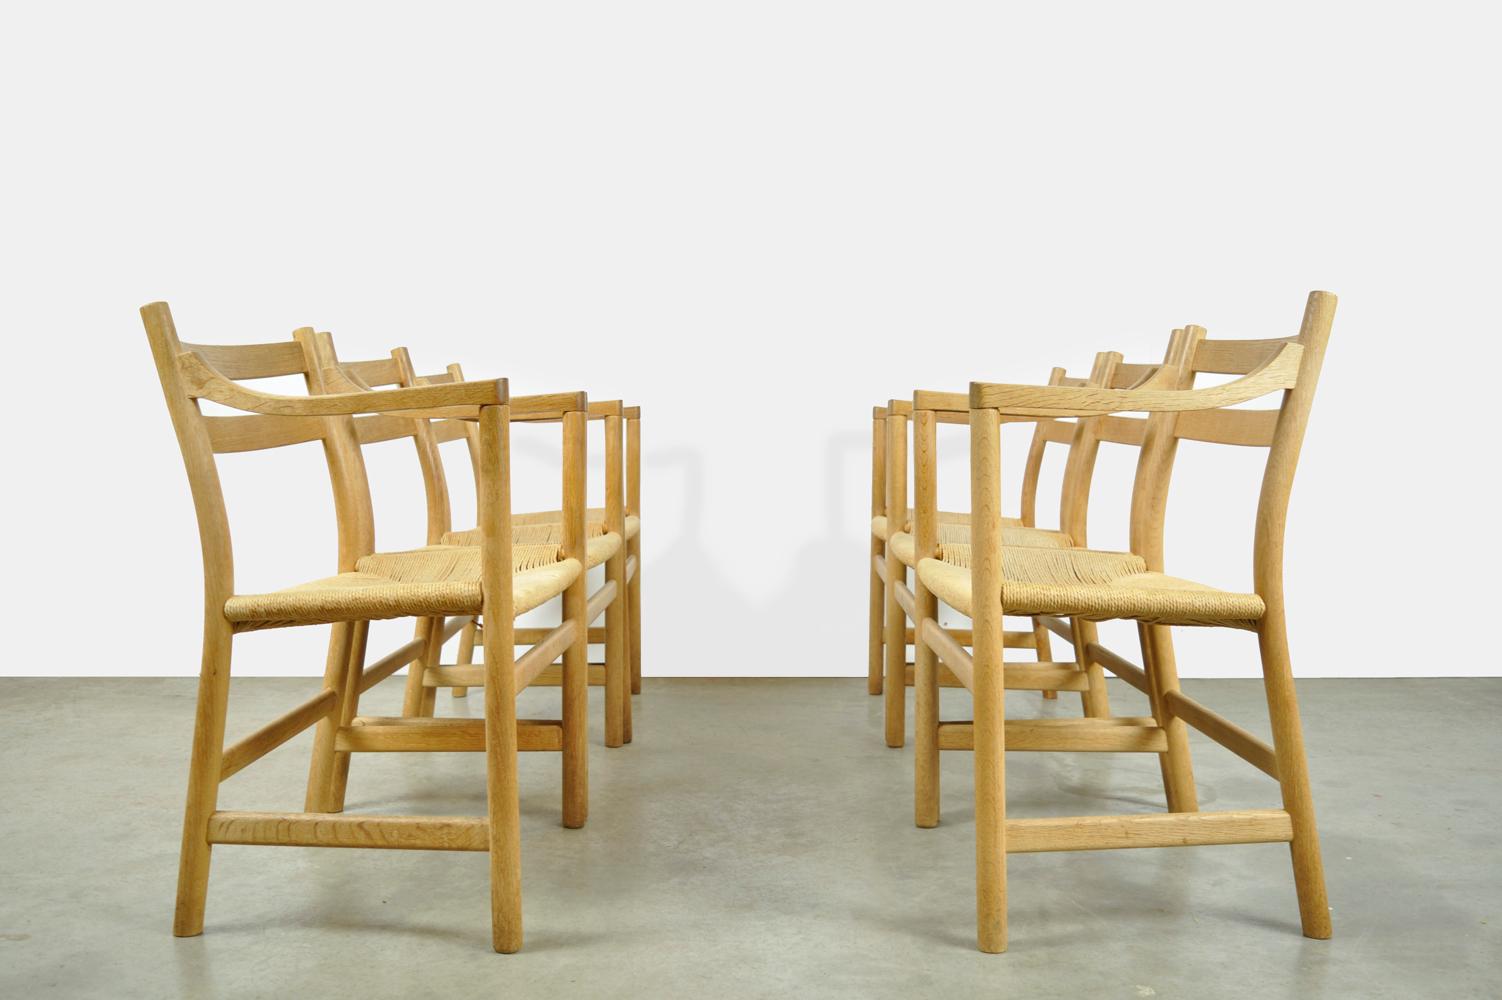 Beautiful set of 6 oak dining table chairs designed by Hans J. Wegner and produced by Carl Hansen & Son, Denmark 1970s. The elegant oak chairs with armrests have a seat made of stretched rope (paper cord). The chairs belong to the first owner who